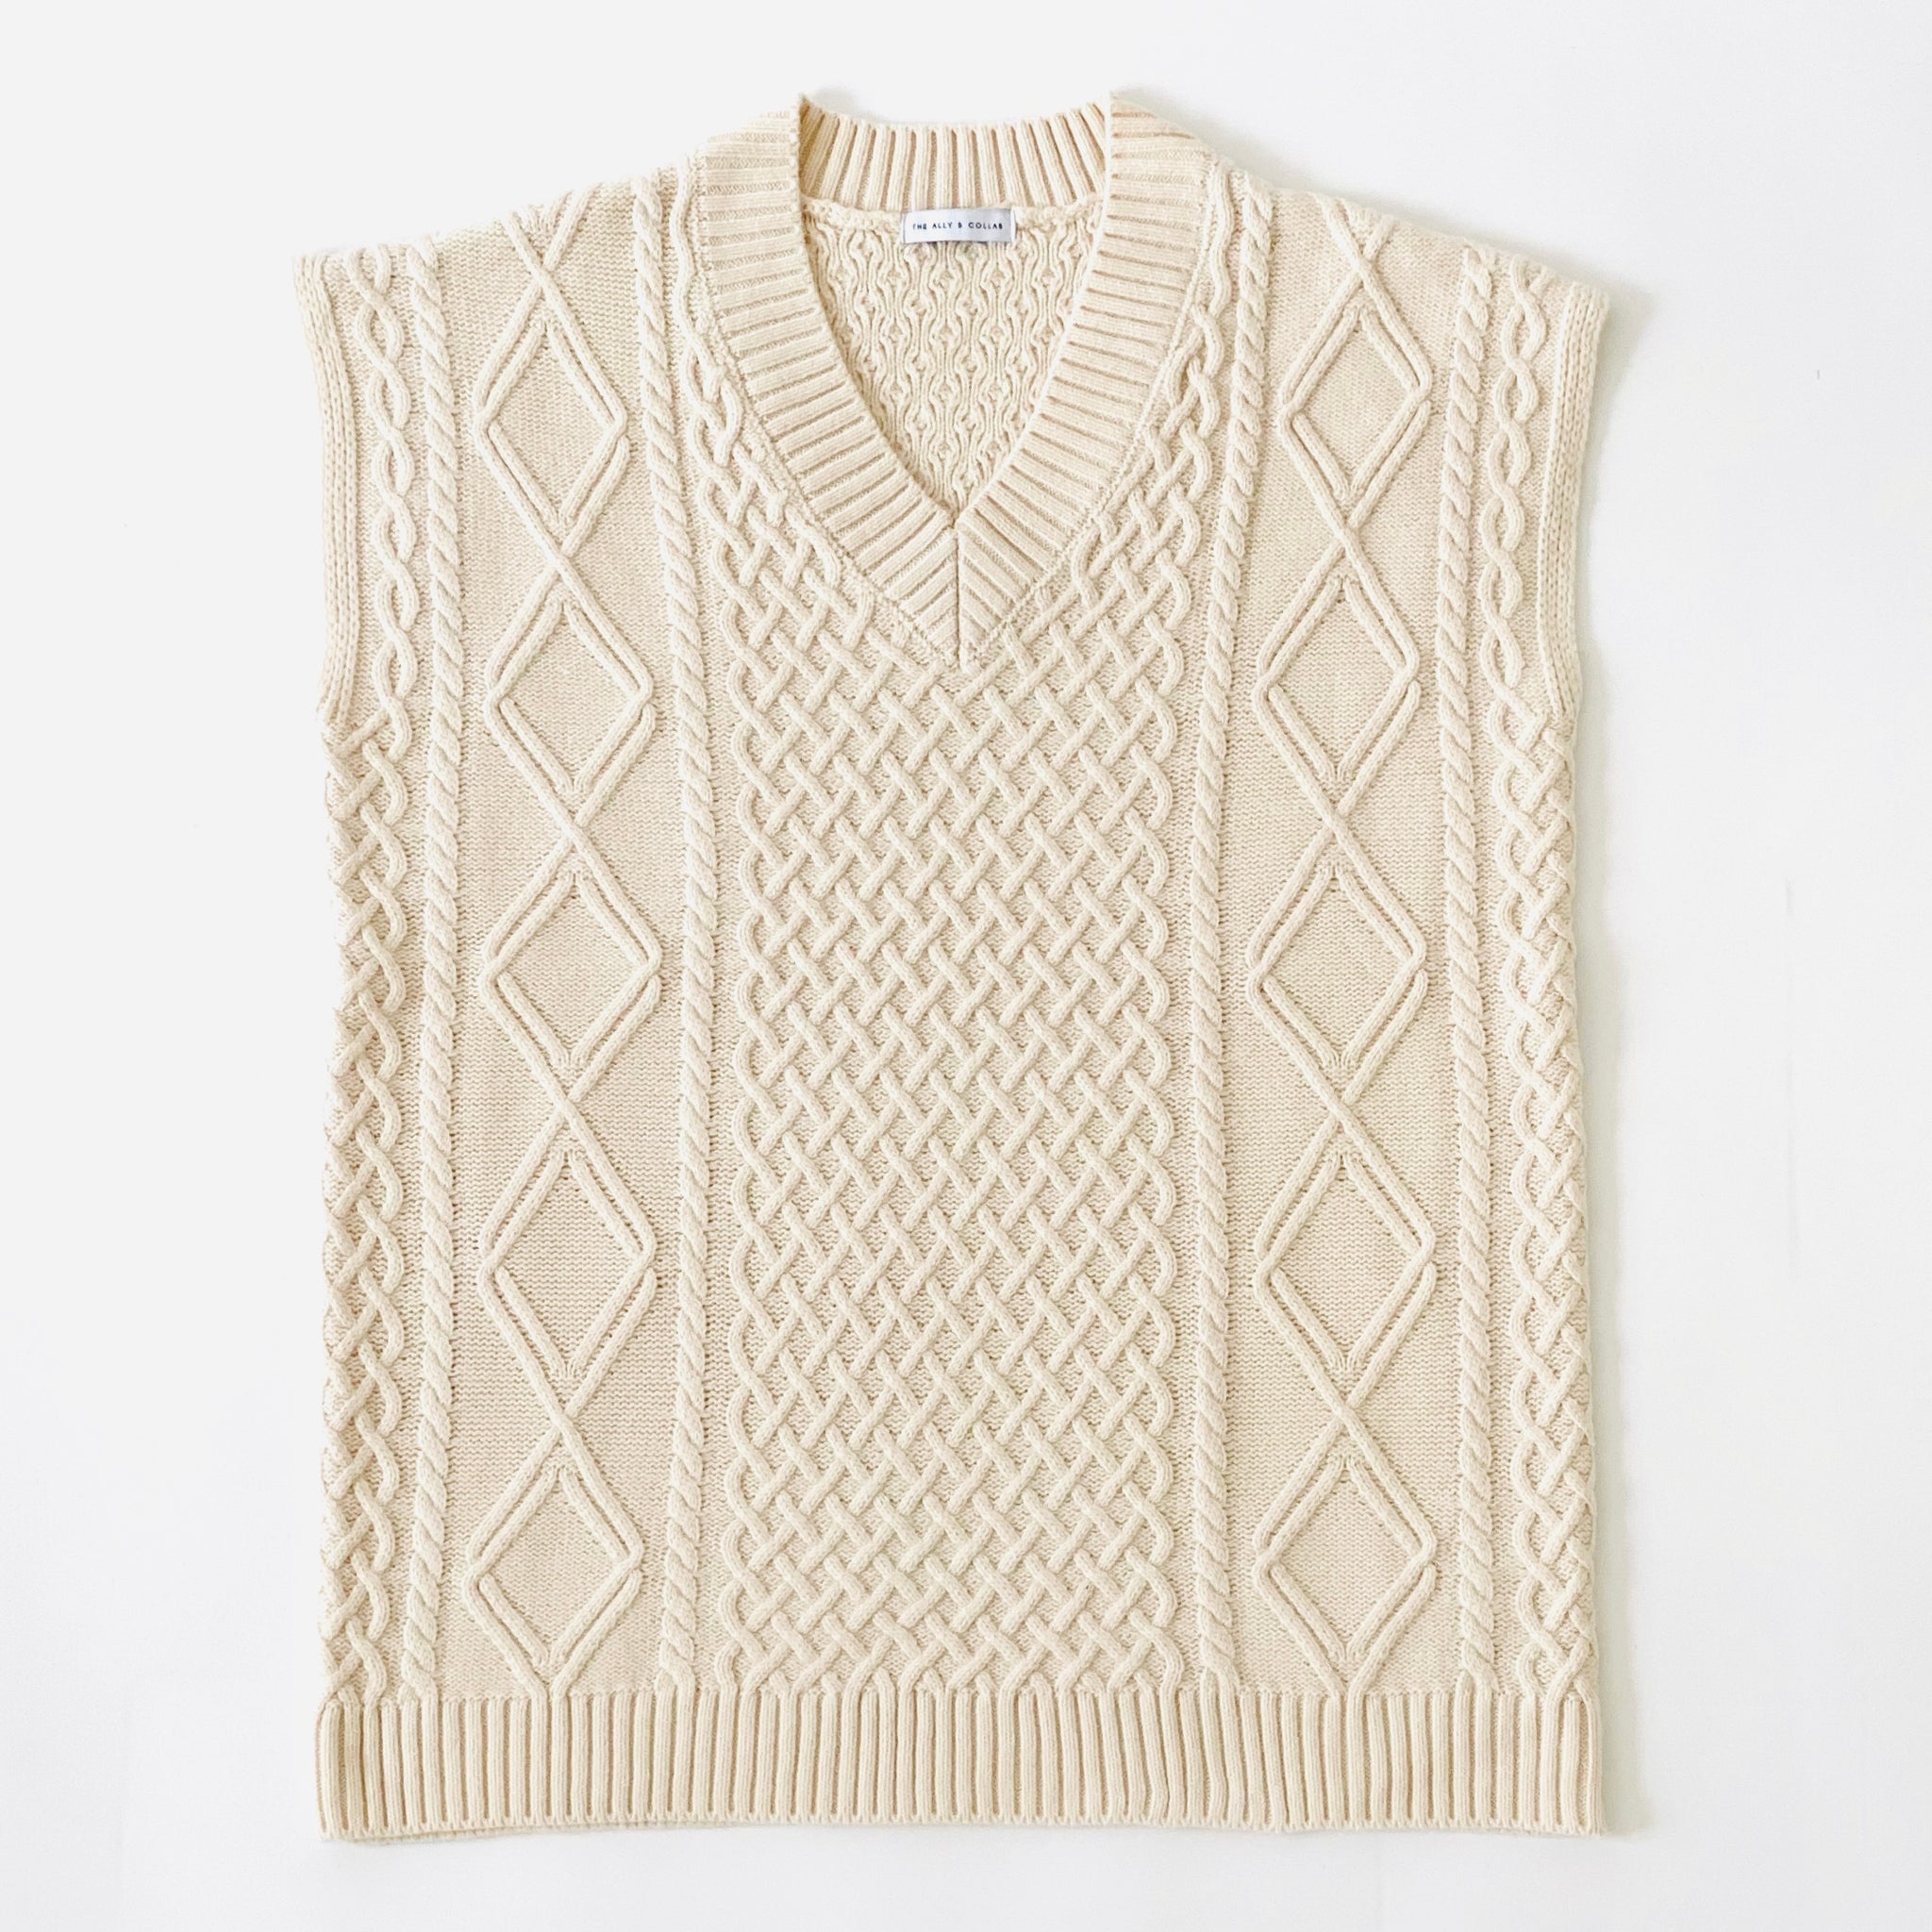 Cabled Up Sweater Vest